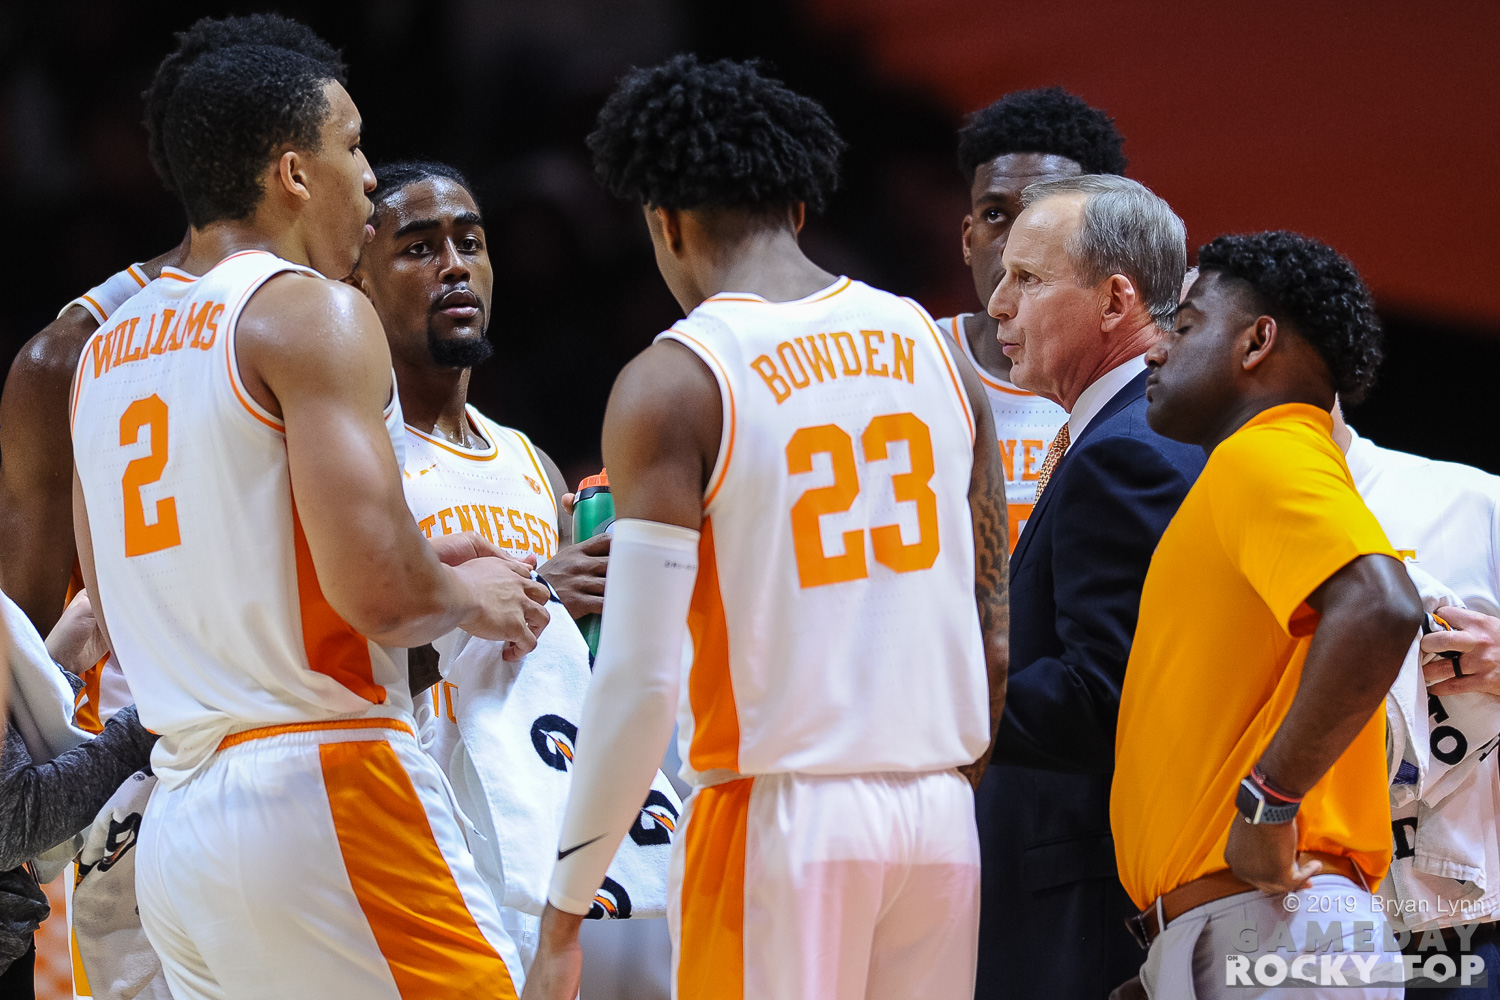 The kryptonite for the Vols to avoid in the NCAA Tournament